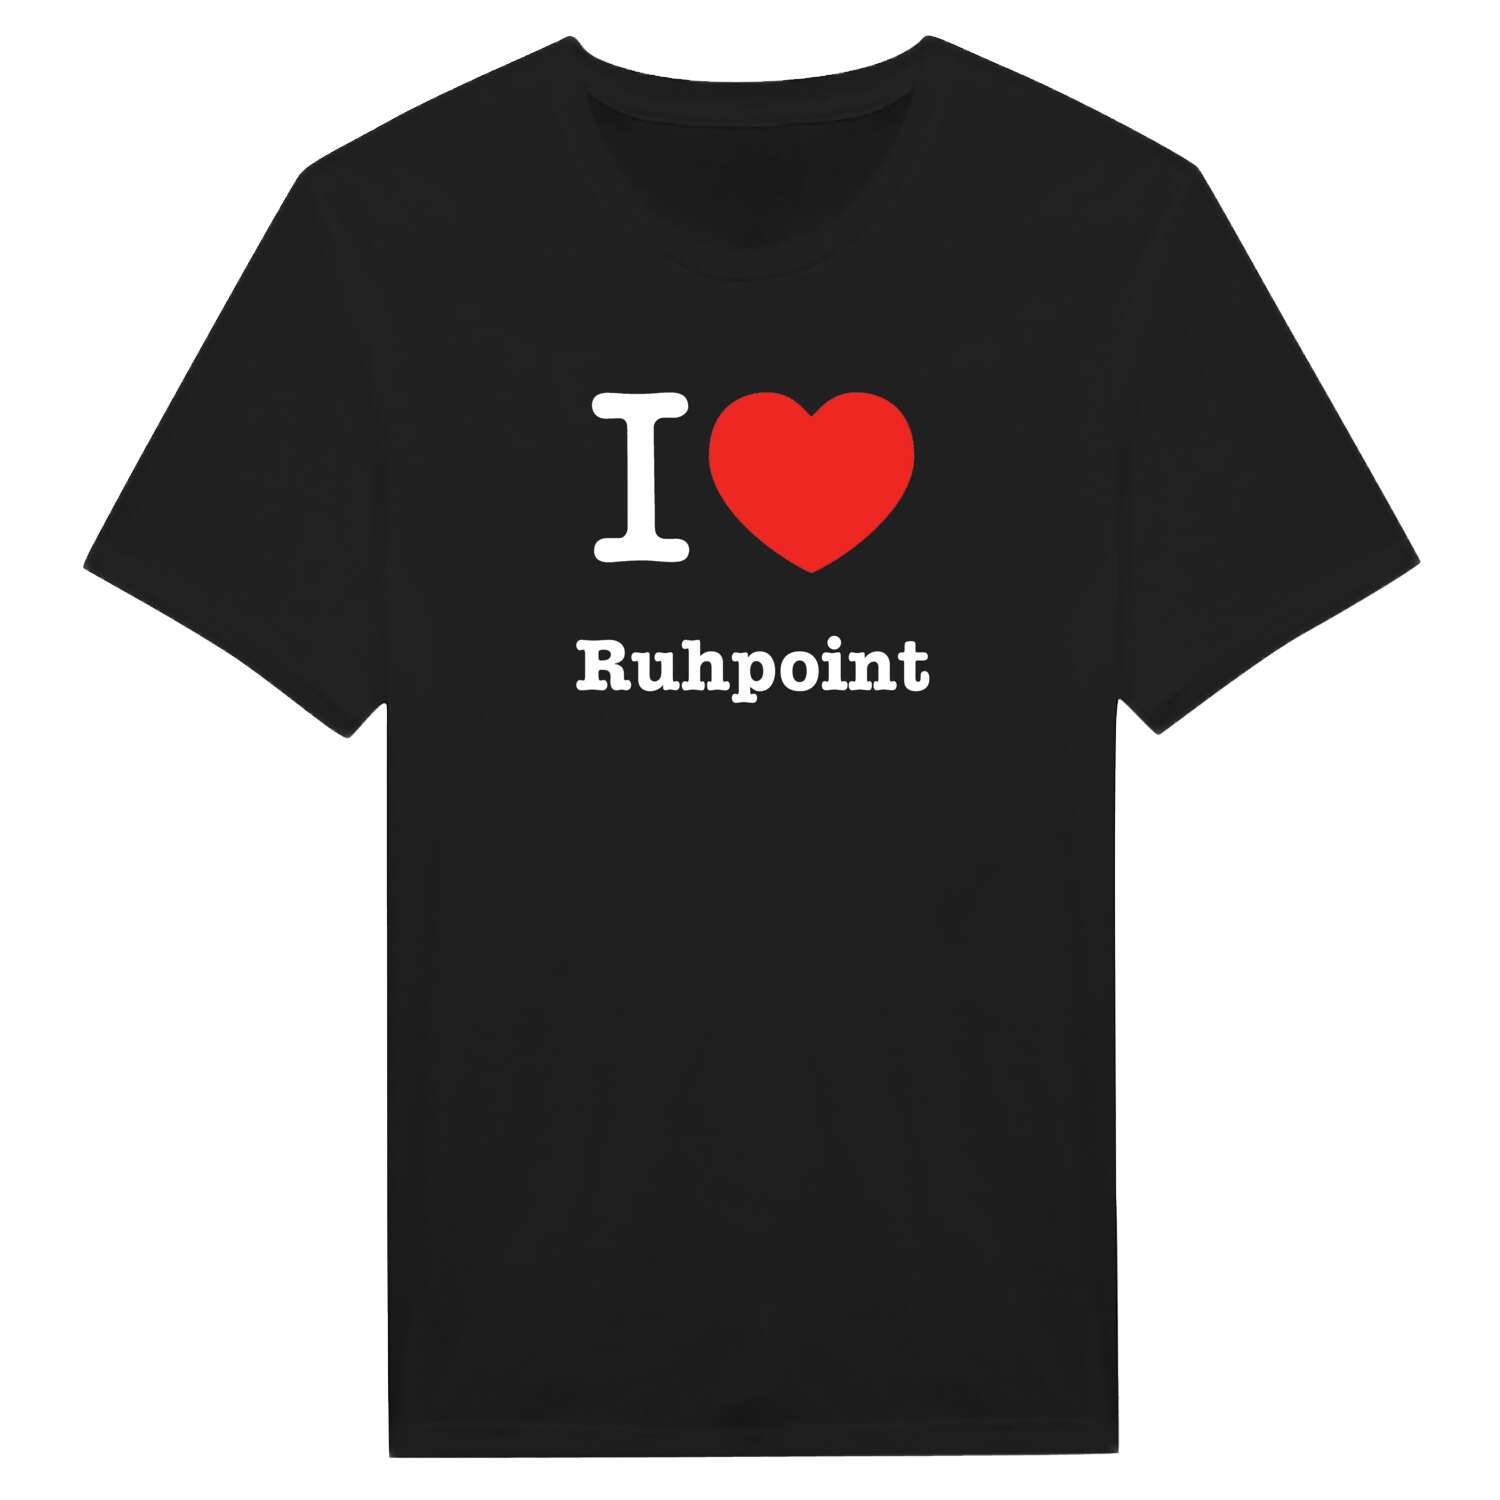 Ruhpoint T-Shirt »I love«